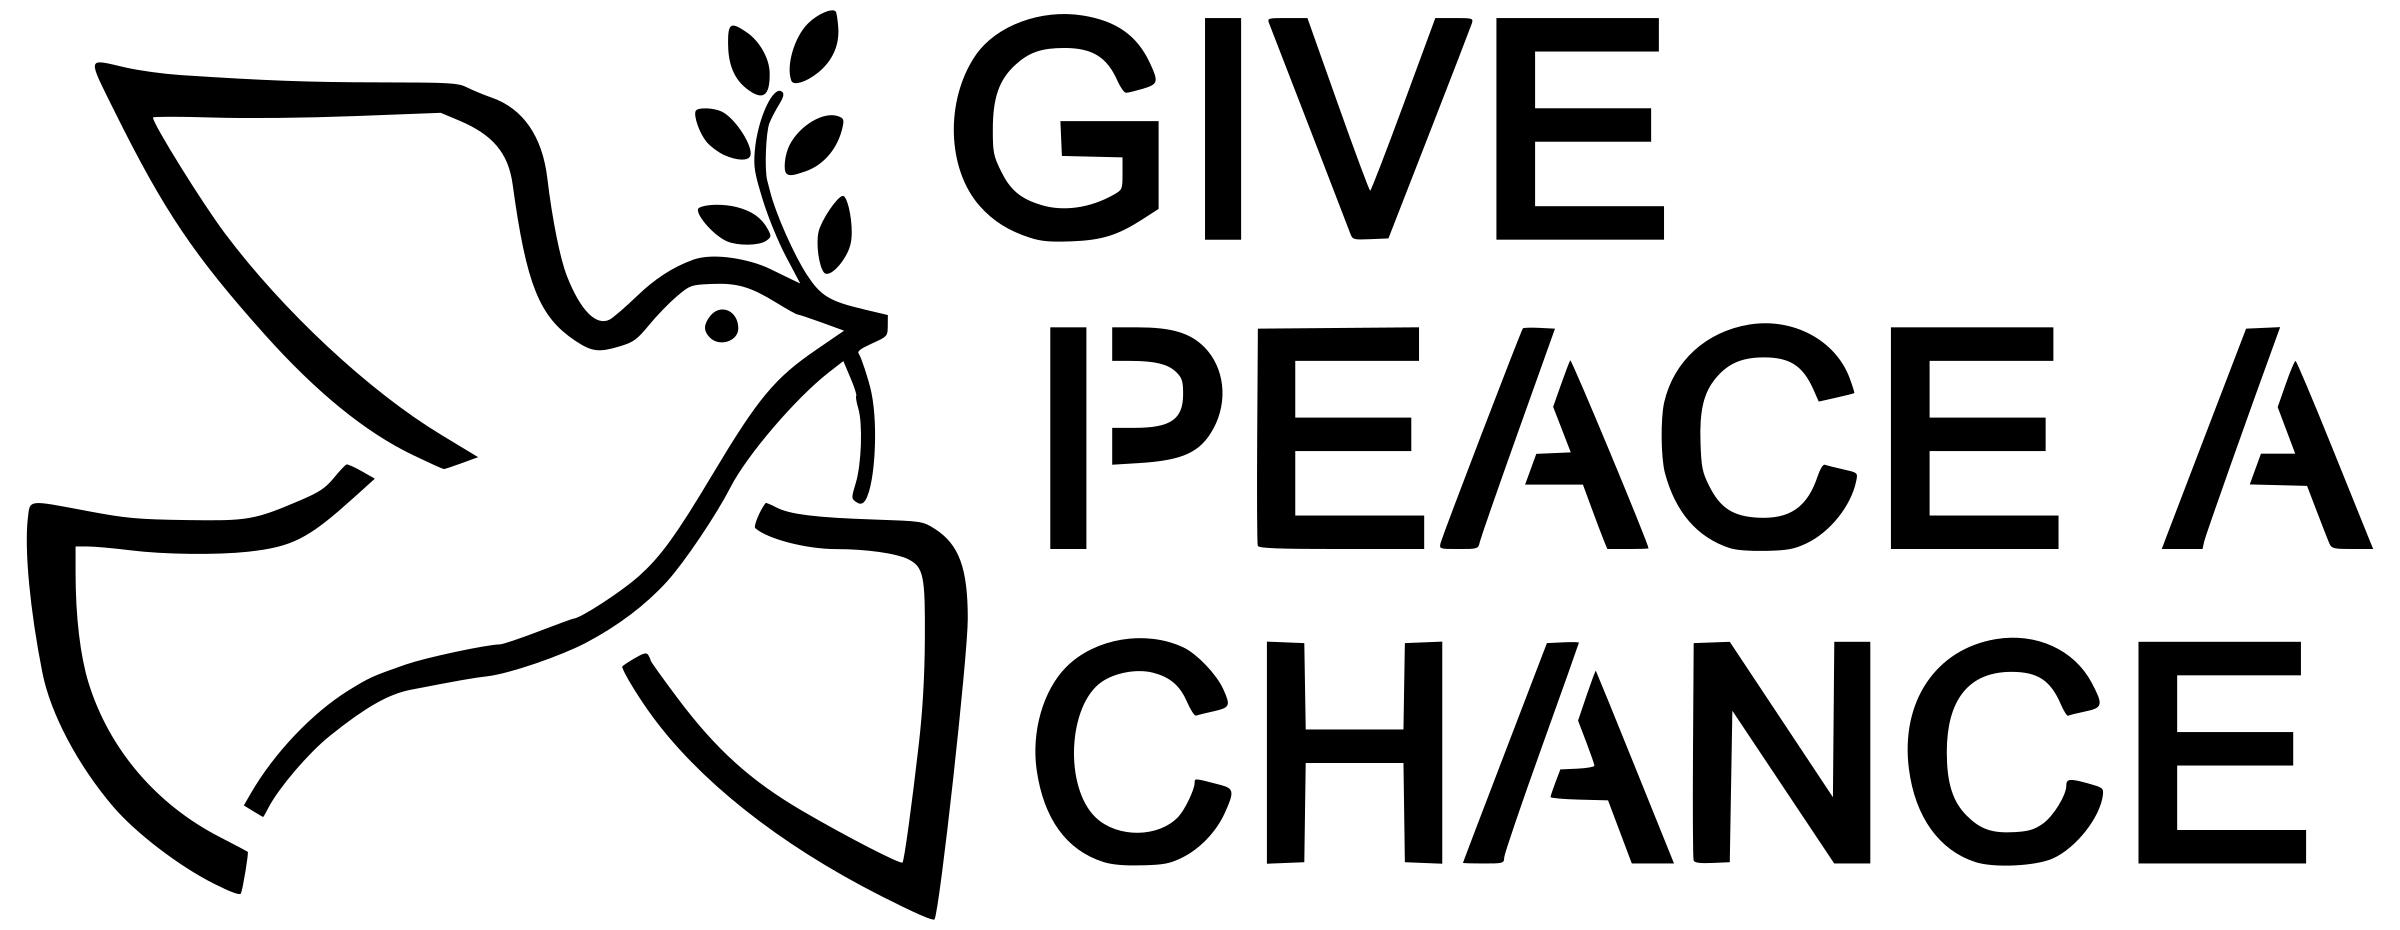 give peace a chance png